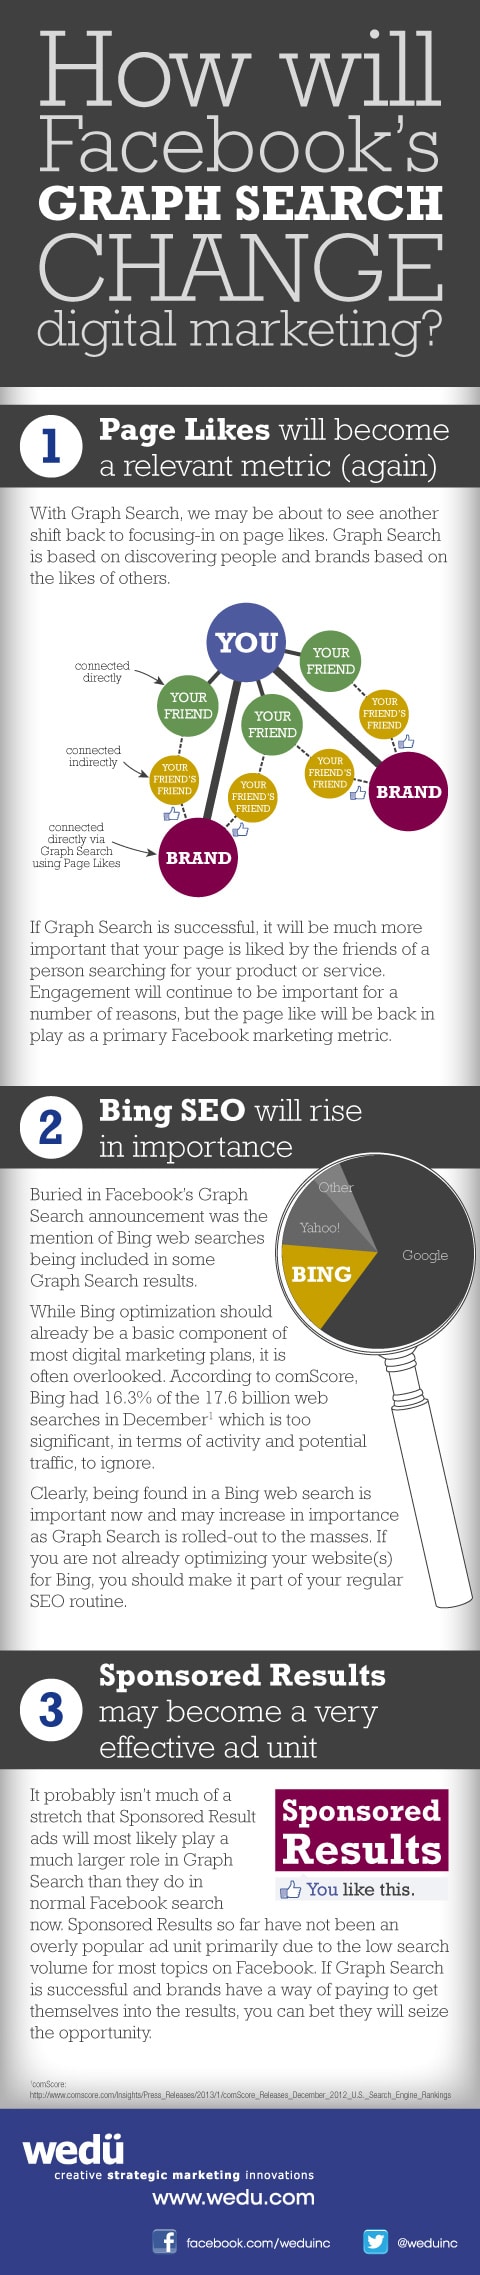 Why Graph Search Will Change Online Marketing [Infographic]